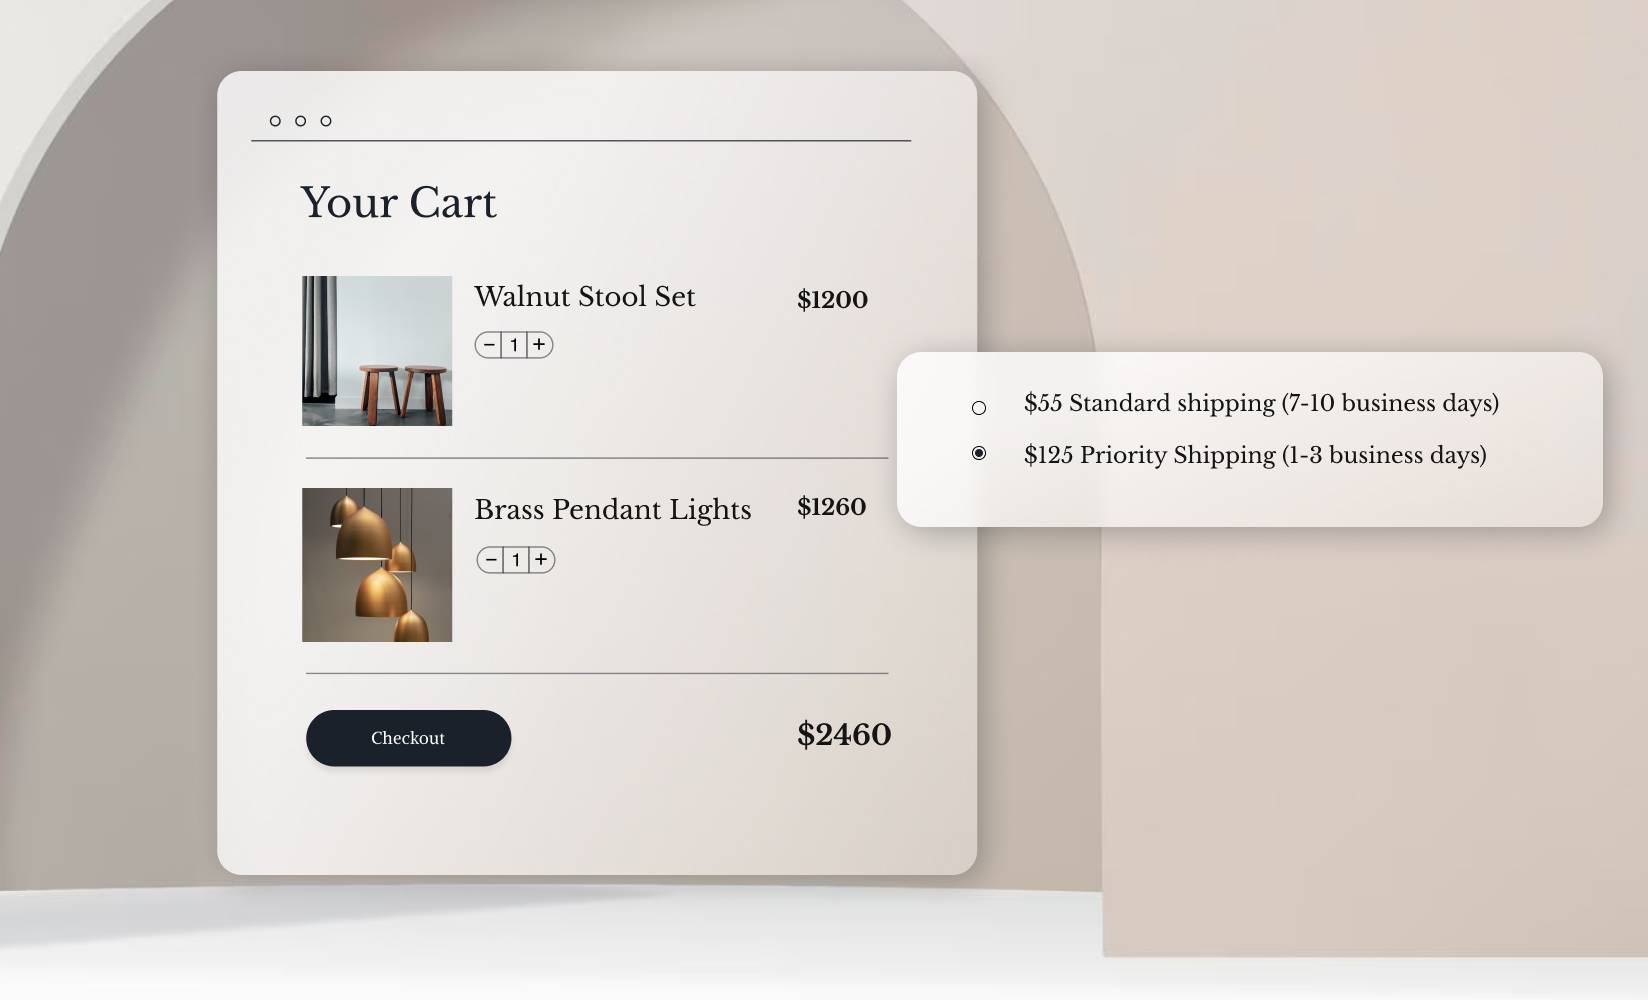 How can I enable estimated delivery time for my Shopify storefront